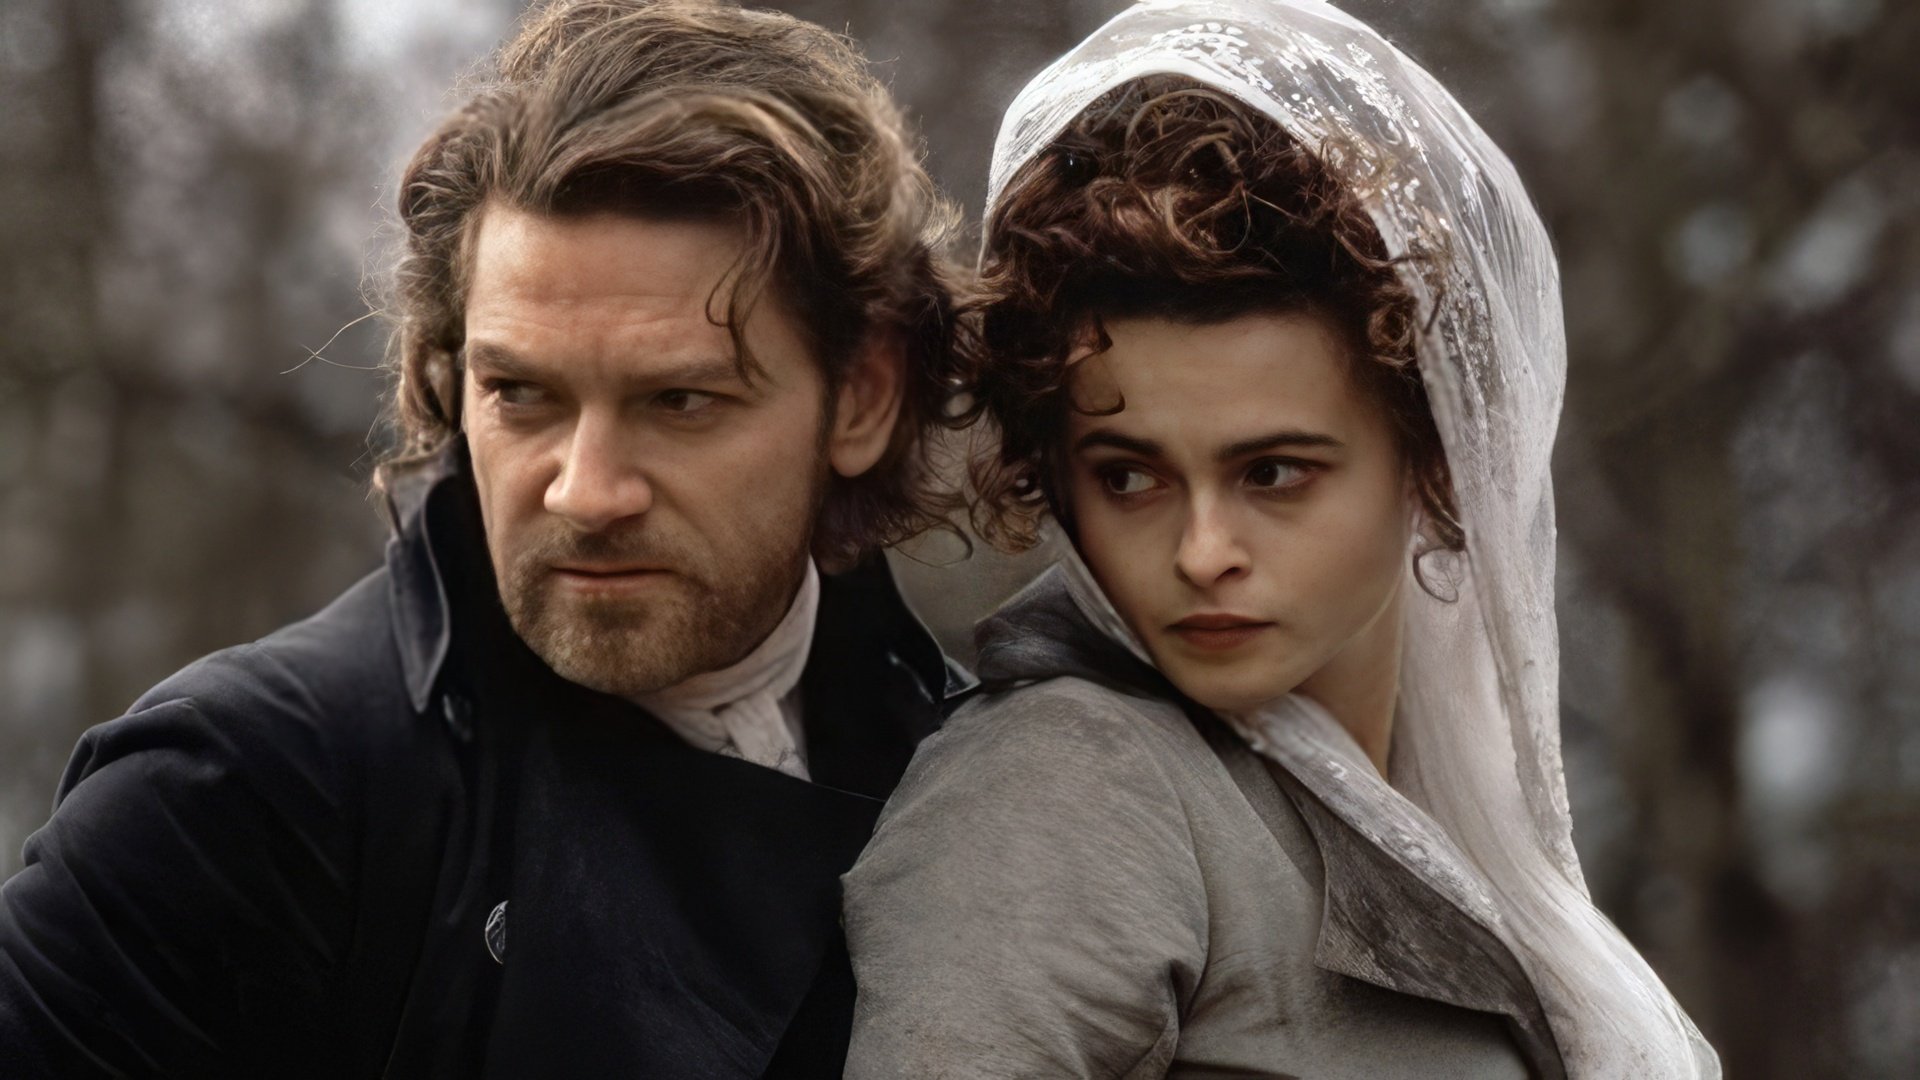 Kenneth Branagh and Helena